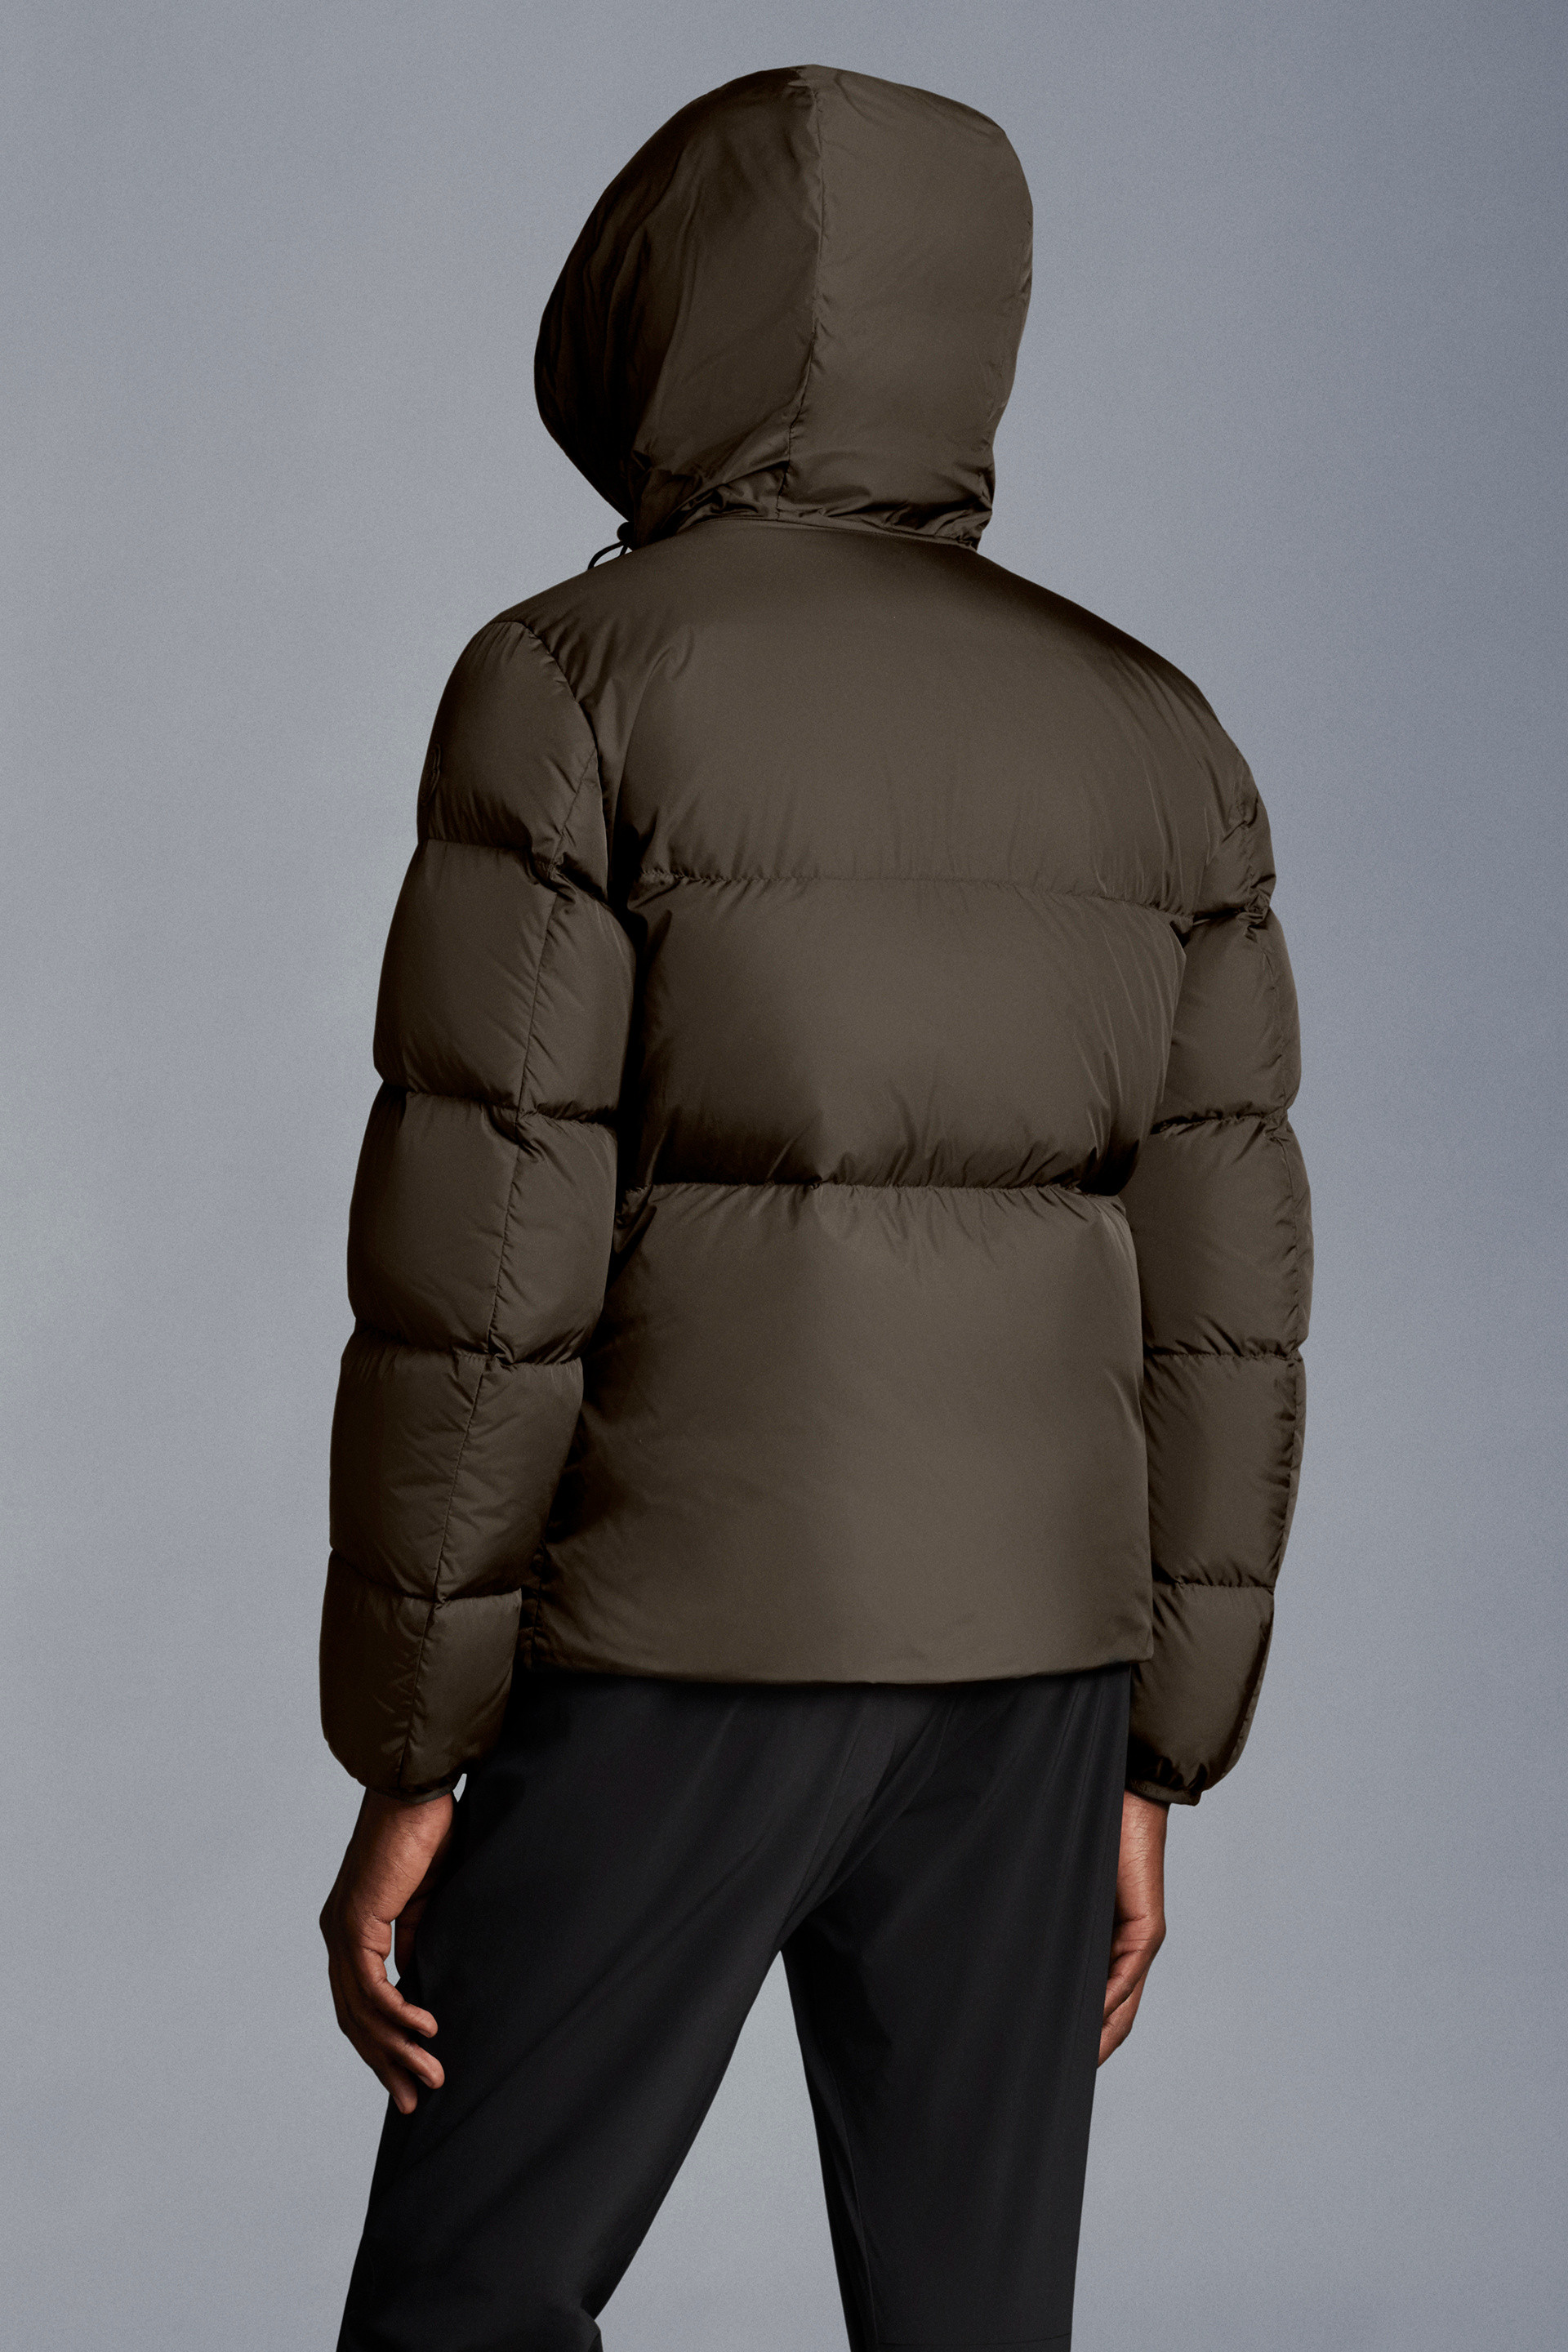 olive green moncler jacket,OFF 63%,www.concordehotels.com.tr